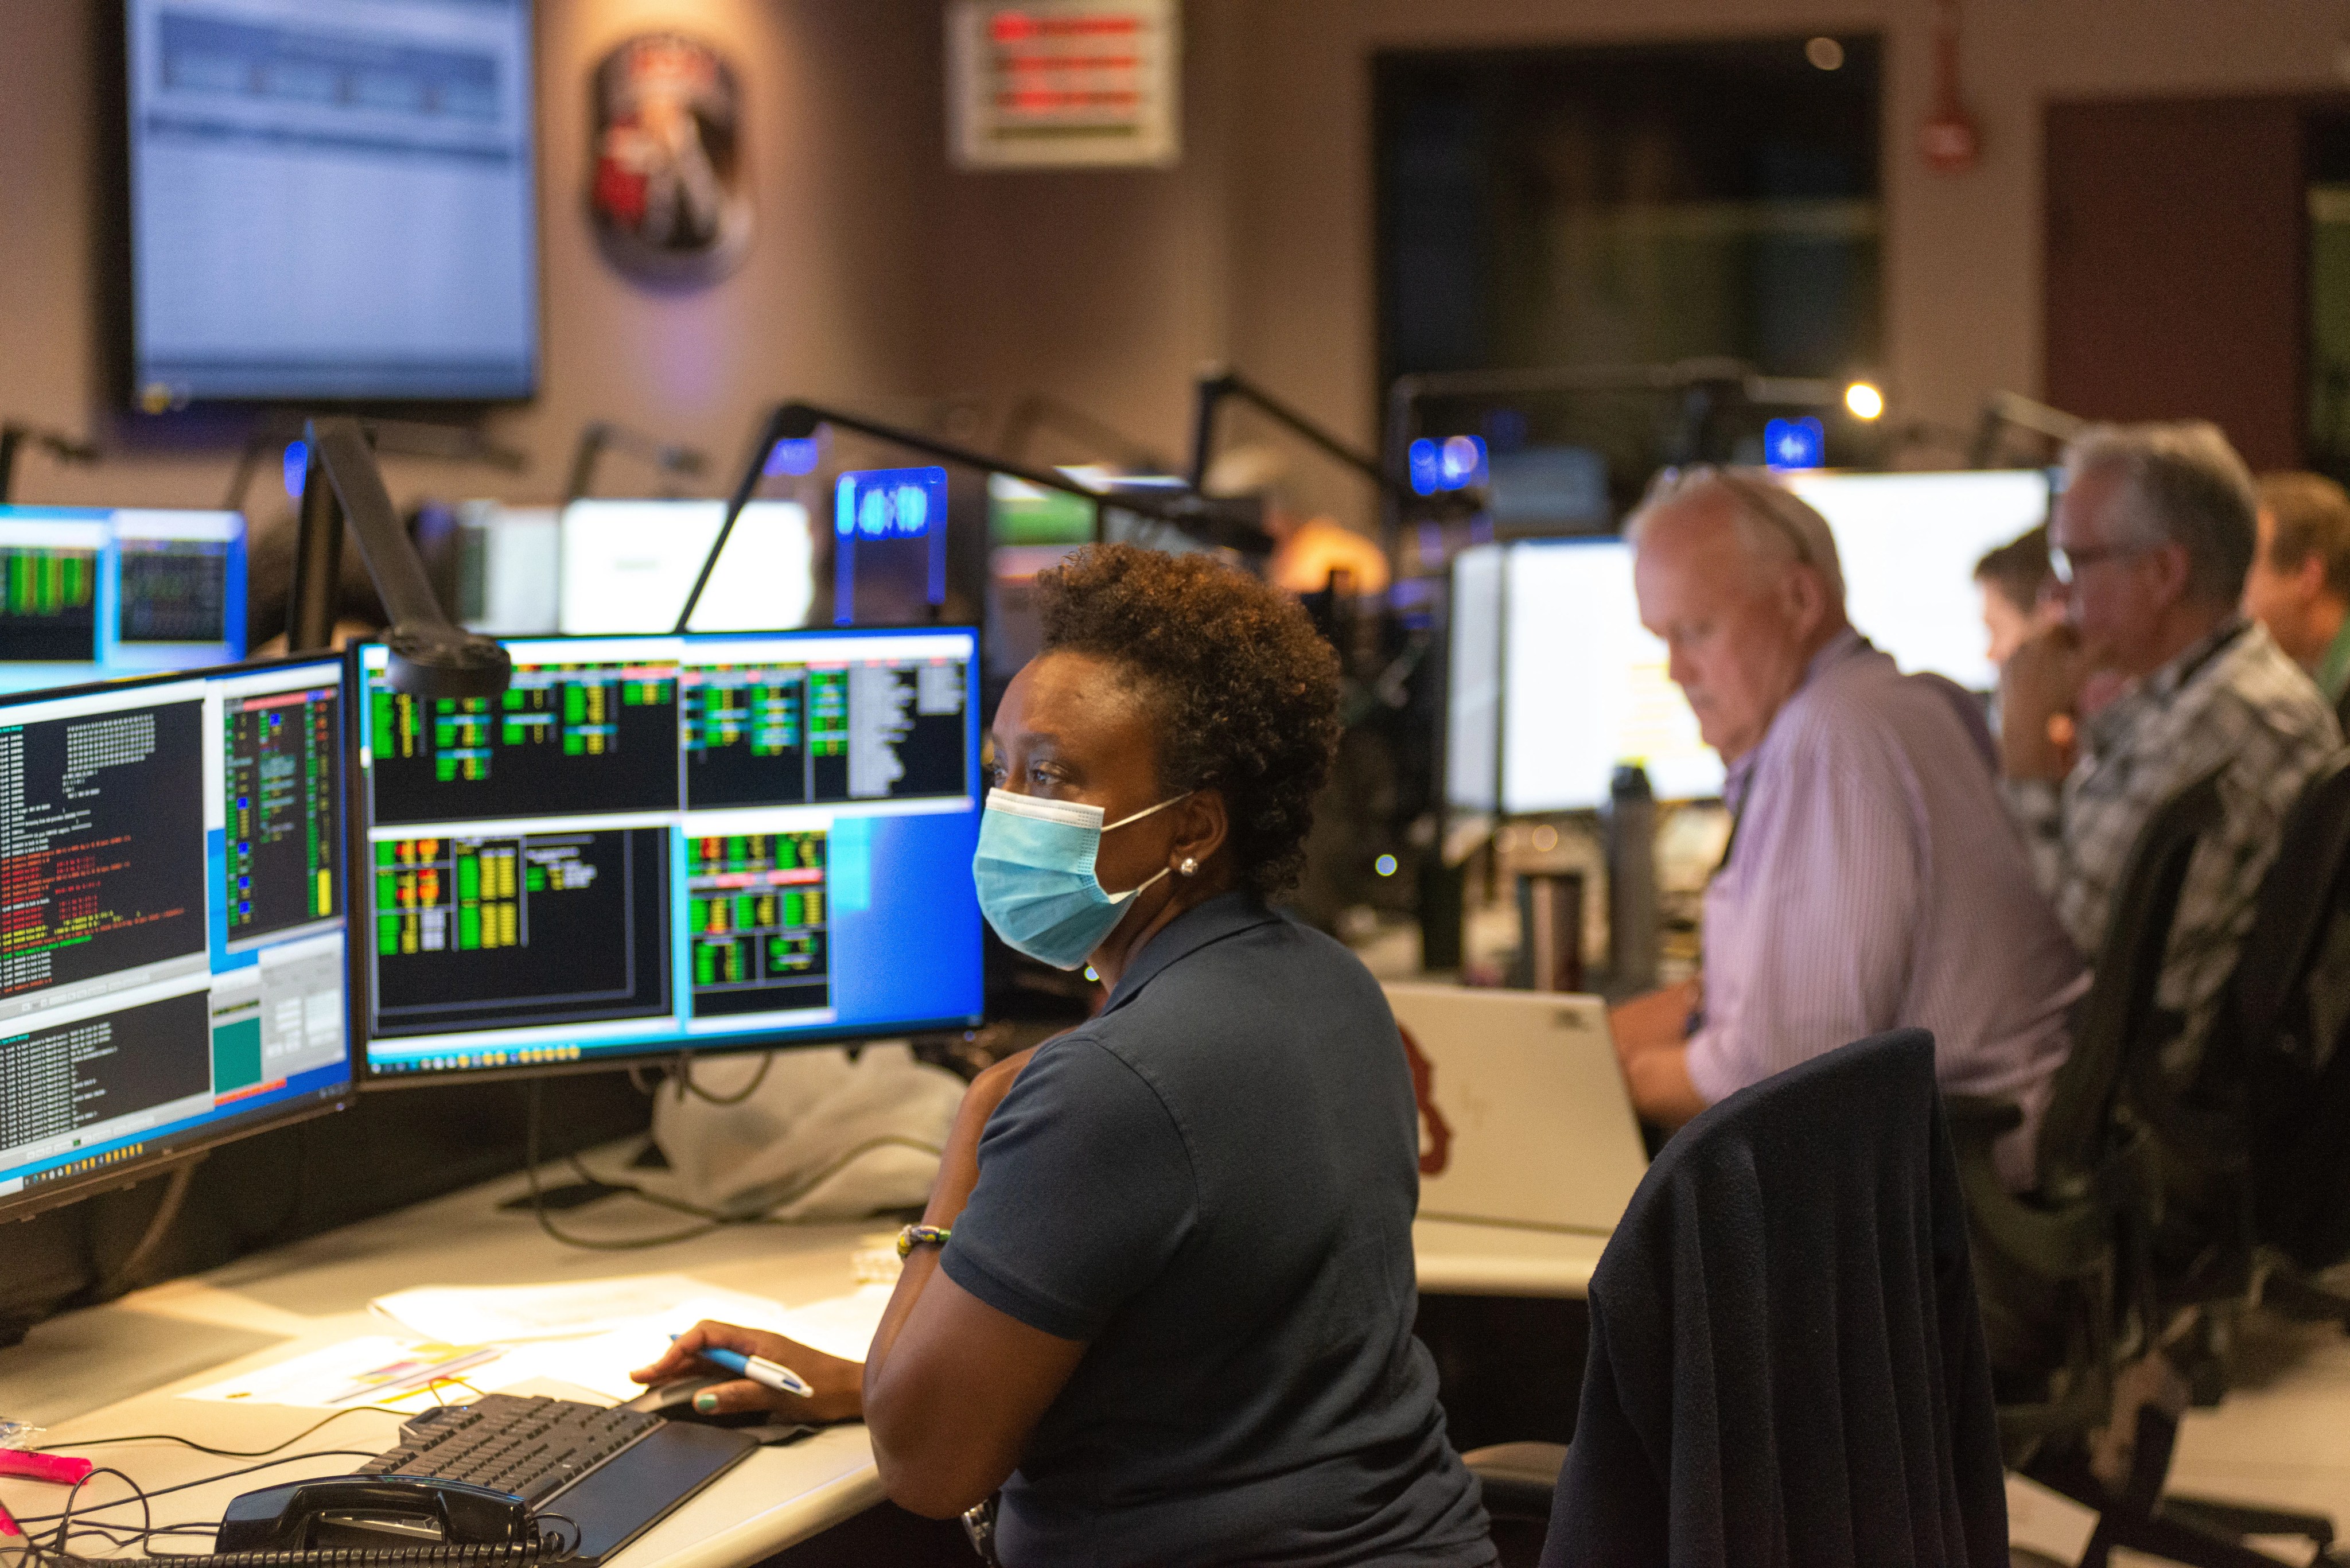 Nzinga Tull, Hubble systems anomaly response manager at NASA’s Goddard Space Flight Center in Greenbelt, Maryland, works in the control room July 15 to restore Hubble to full science operations.